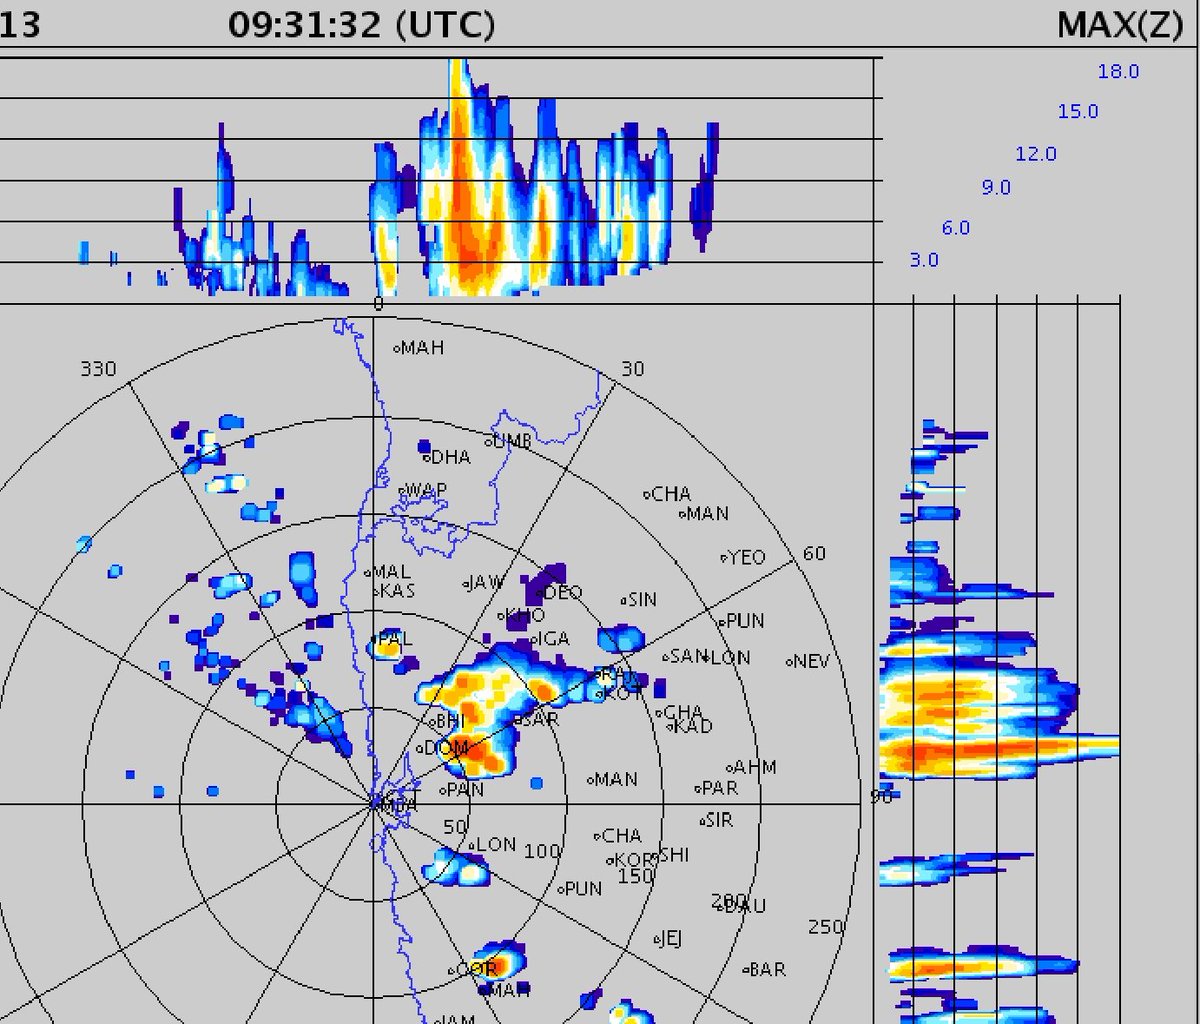 Nowcast Warning for #Thane #NaviMumbai ⚠️

#Thunderstorm cloud height is currently 18 km high over #Dombivli region.

Intense reflectivity indicates possibility of heavy #MumbaiRains with hail & thunder ⛈️ likely over KDMC and Bhiwandi.

How's the weather where you are?